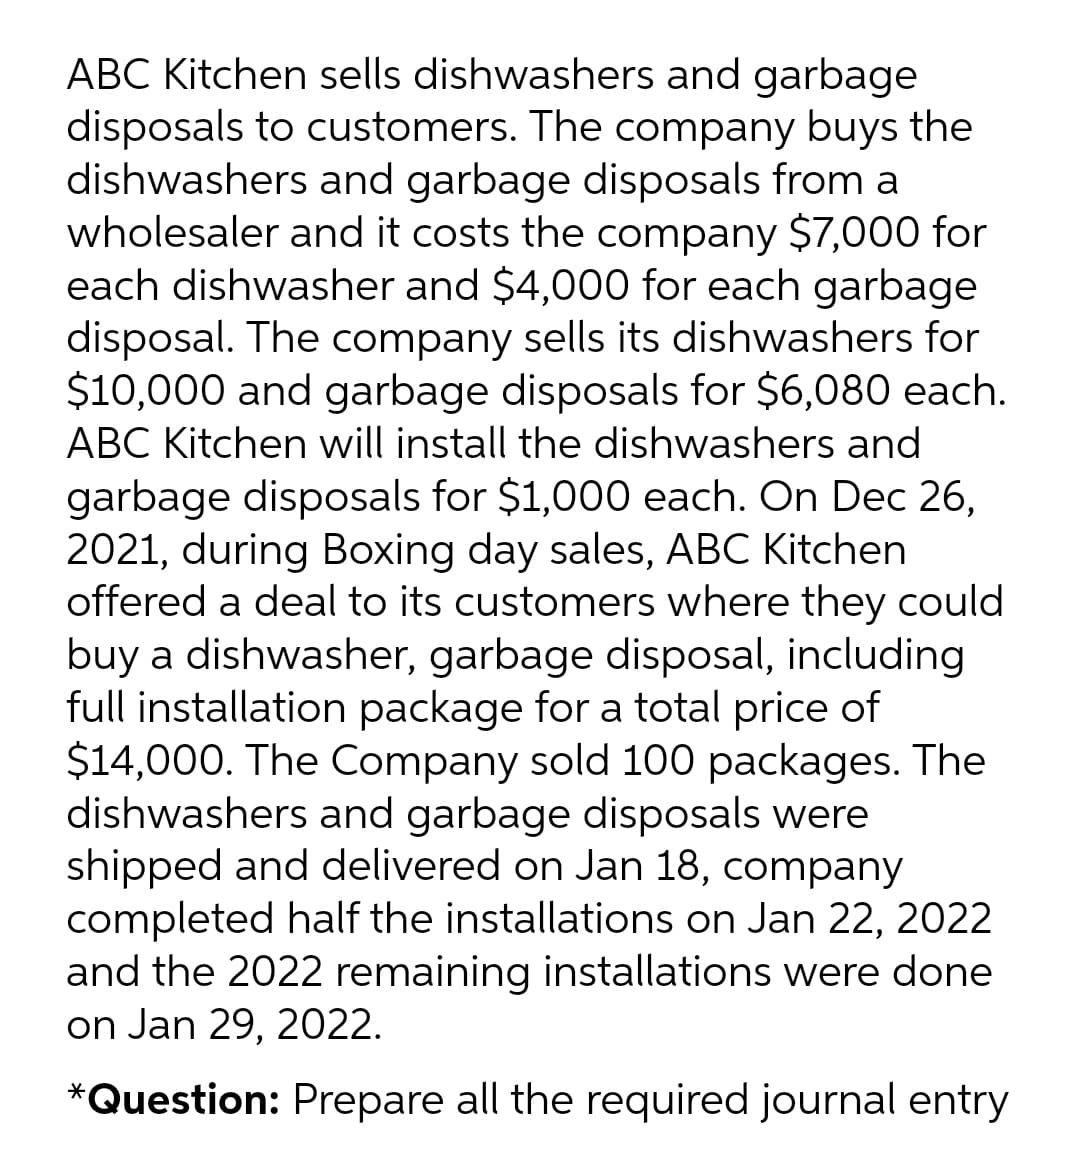 ABC Kitchen sells dishwashers and garbage
disposals to customers. The company buys the
dishwashers and garbage disposals from a
wholesaler and it costs the company $7,000 for
each dishwasher and $4,000 for each garbage
disposal. The company sells its dishwashers for
$10,000 and garbage disposals for $6,080 each.
ABC Kitchen will install the dishwashers and
garbage disposals for $1,000 each. On Dec 26,
2021, during Boxing day sales, ABC Kitchen
offered a deal to its customers where they could
buy a dishwasher, garbage disposal, including
full installation package for a total price of
$14,000. The Company sold 100 packages. The
dishwashers and garbage disposals were
shipped and delivered on Jan 18, company
completed half the installations on Jan 22, 2022
and the 2022 remaining installations were done
on Jan 29, 2022.
*Question: Prepare all the required journal entry
